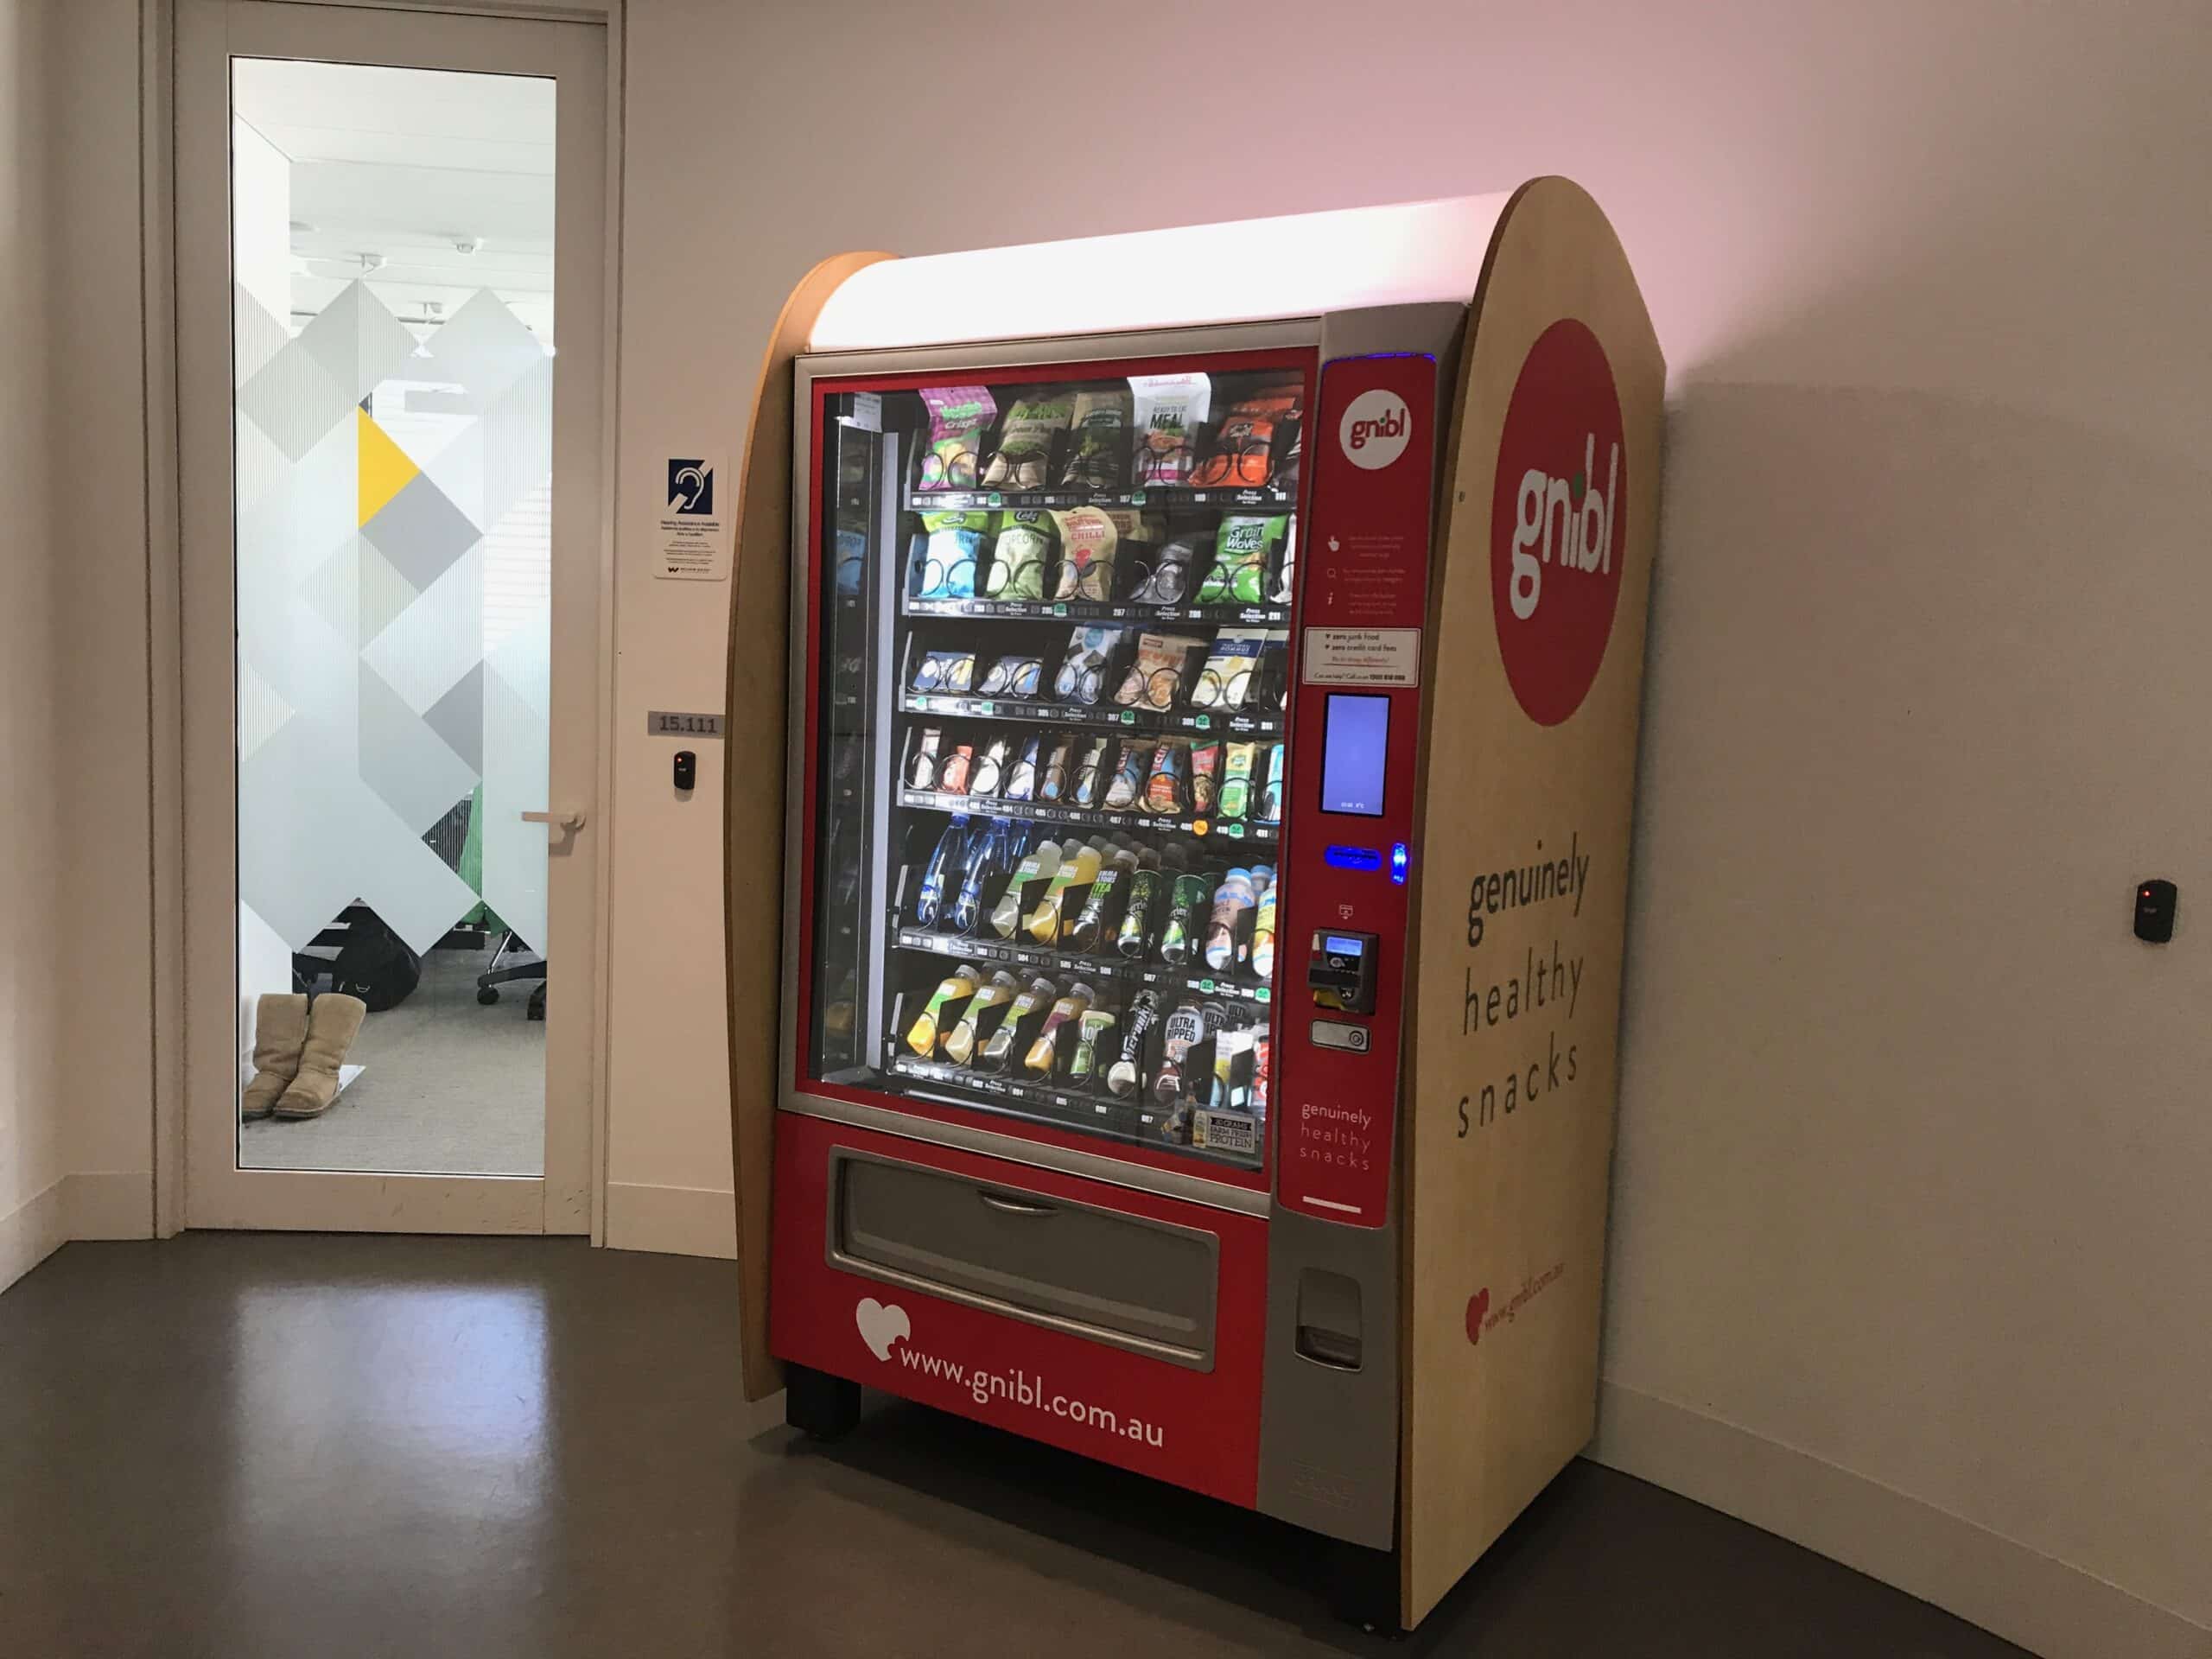 A Gnibl healthy vending machine in a workplace setting, stocked with snack options.